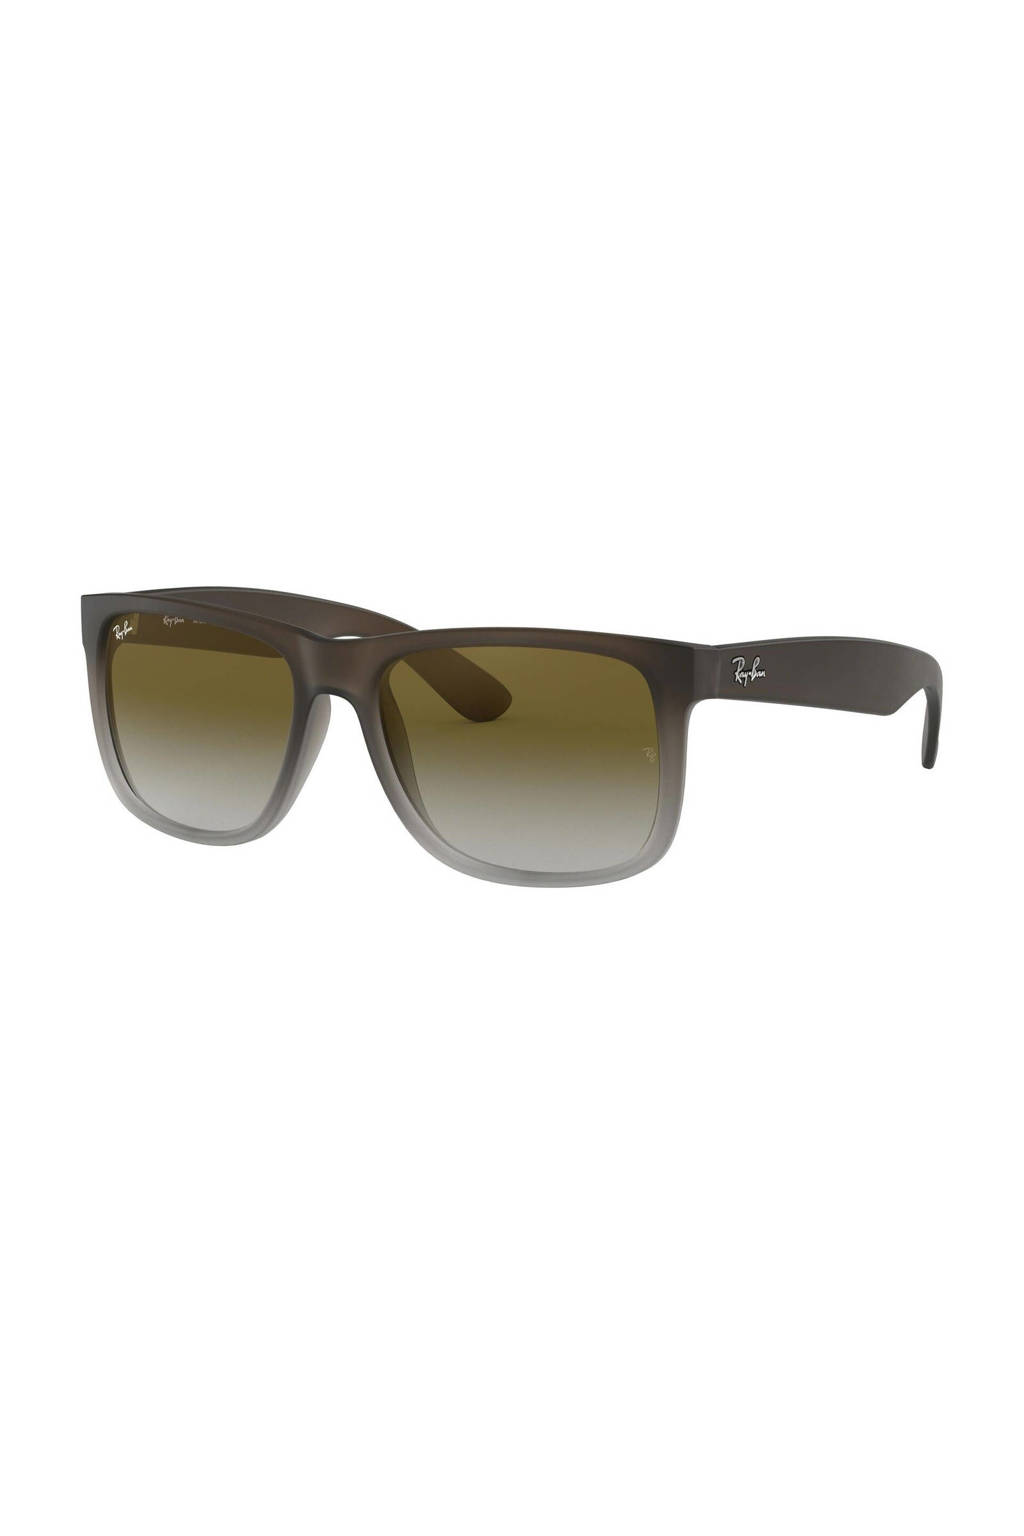 Ray-Ban zonnebril 0RB4165 donkerbruin